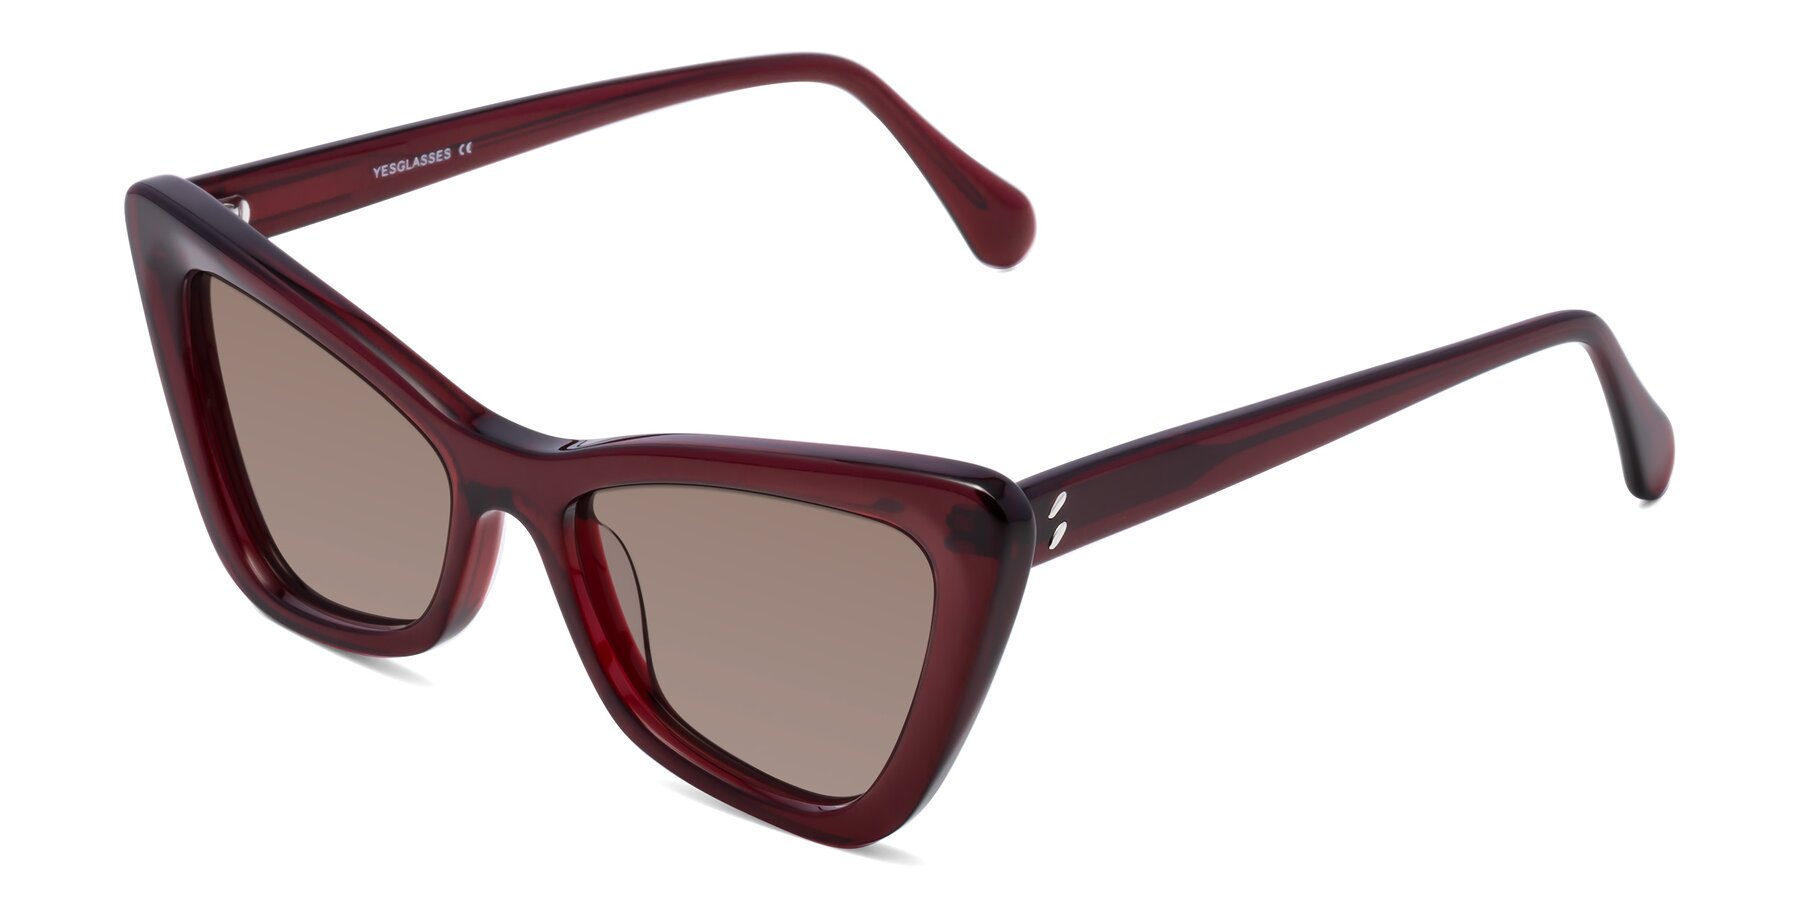 Angle of Rua in Wine with Medium Brown Tinted Lenses